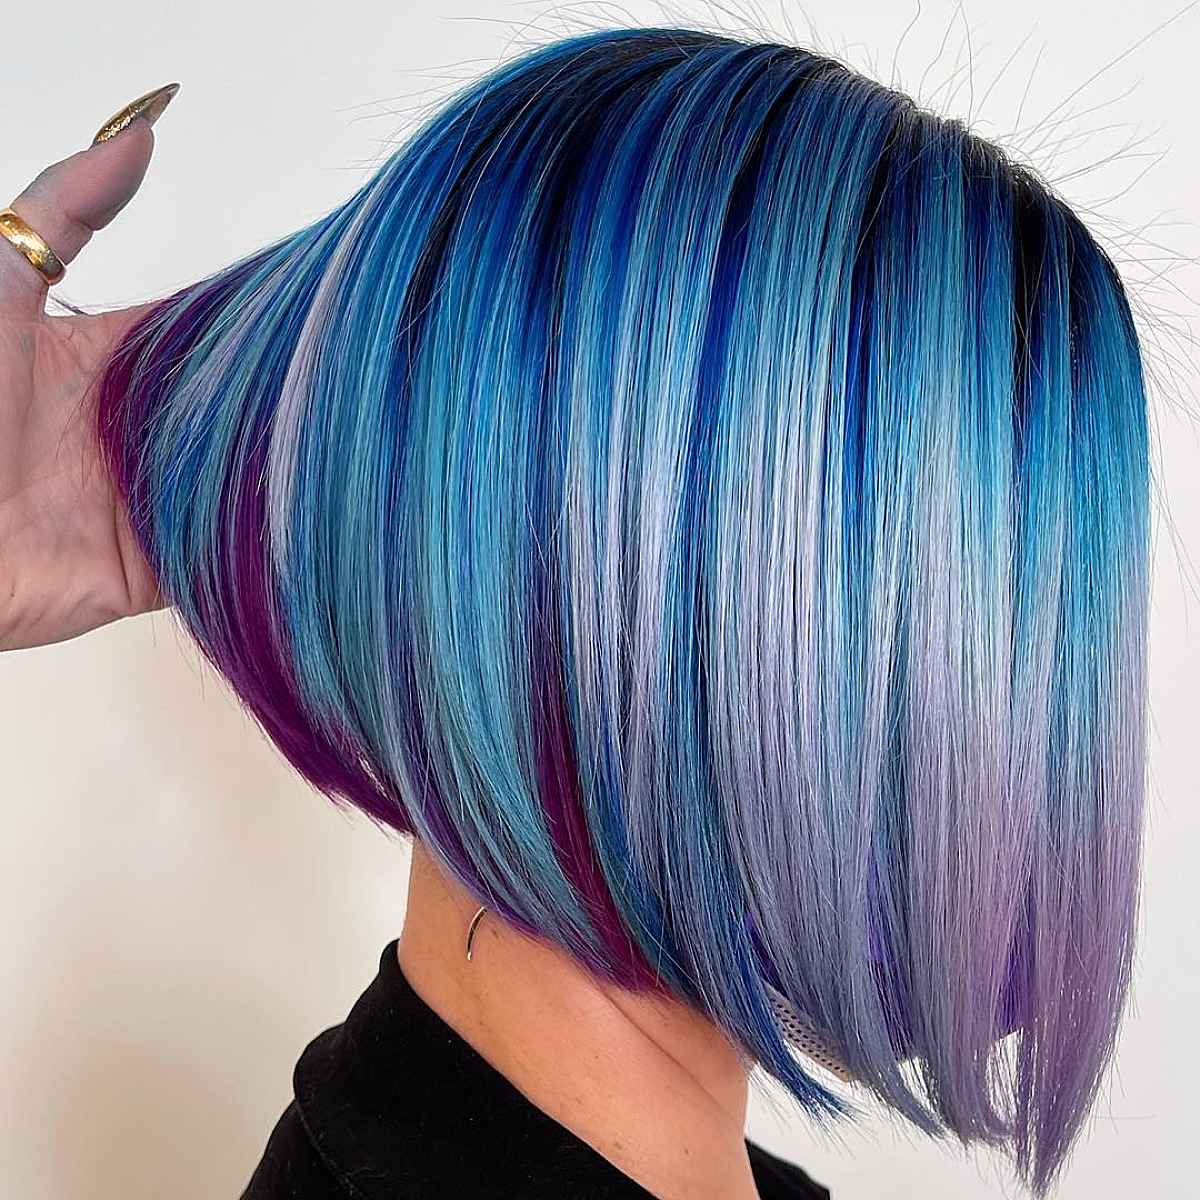 These Are The Top 50 Hair Color Ideas for Winter 2023